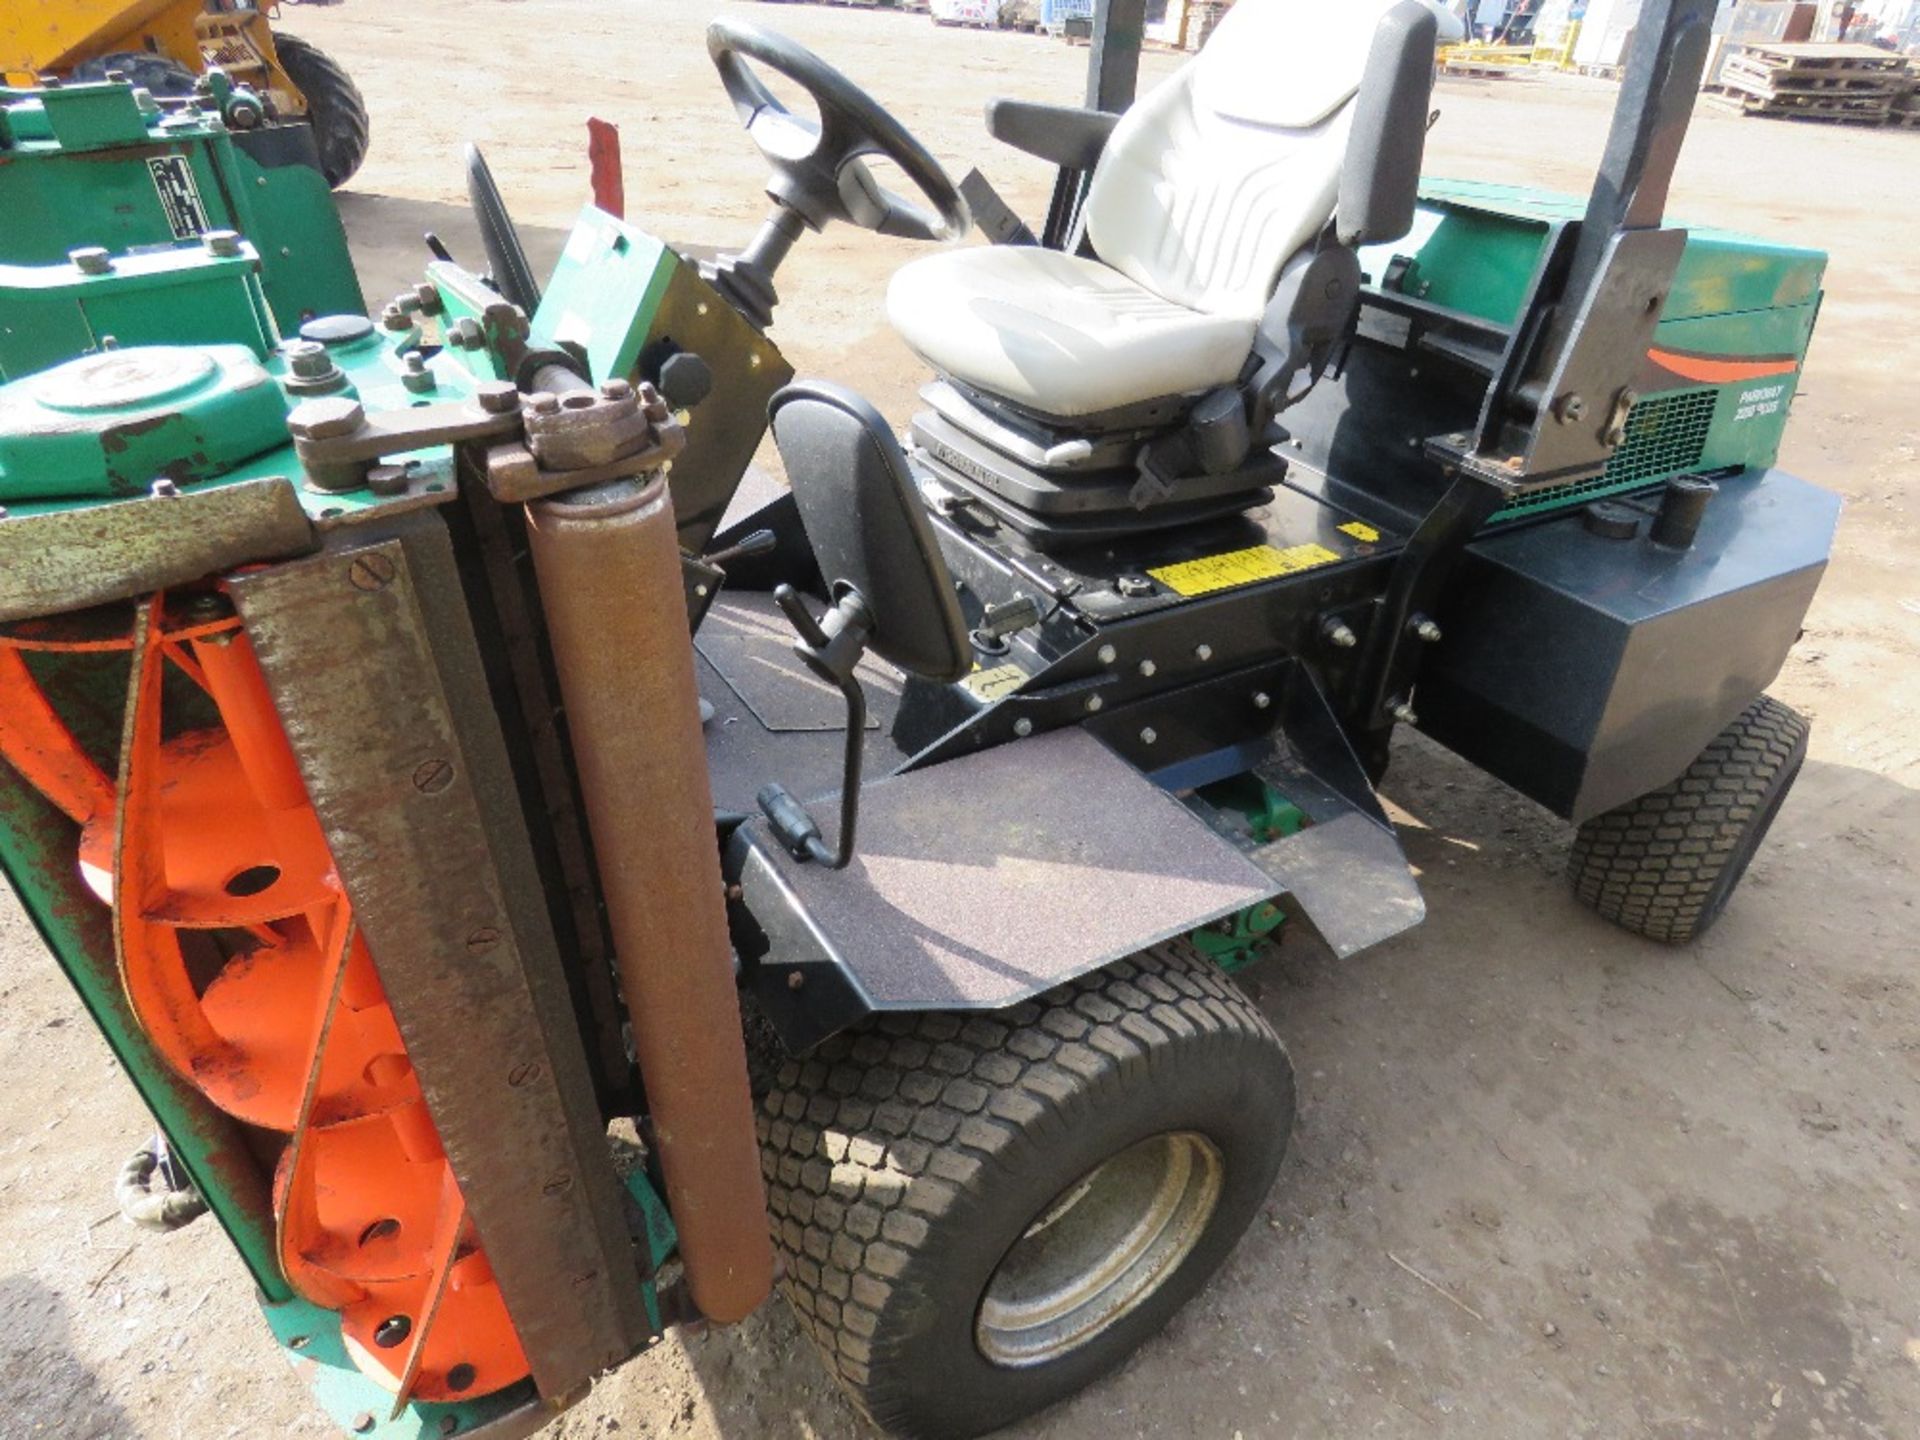 RANSOMES PARKWAY 2250 PLUS PROFESSIONAL TRIPLE RIDE ON MOWER, 4WD, 3300 REC HOURS. DIRECT FROM GOLF - Image 6 of 11